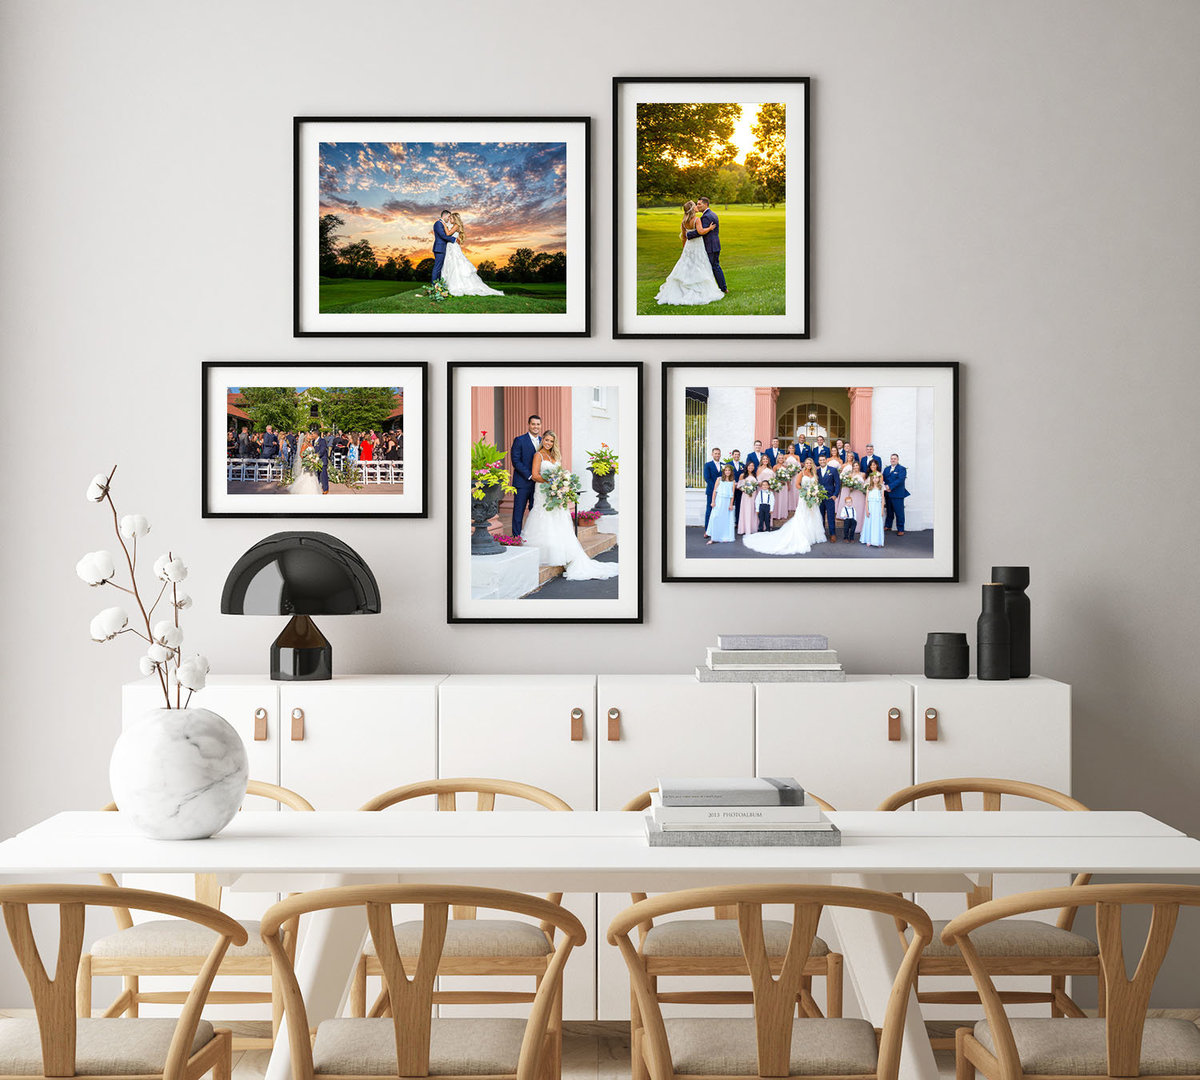 A collection of 5 images on a wall in a dinning area.